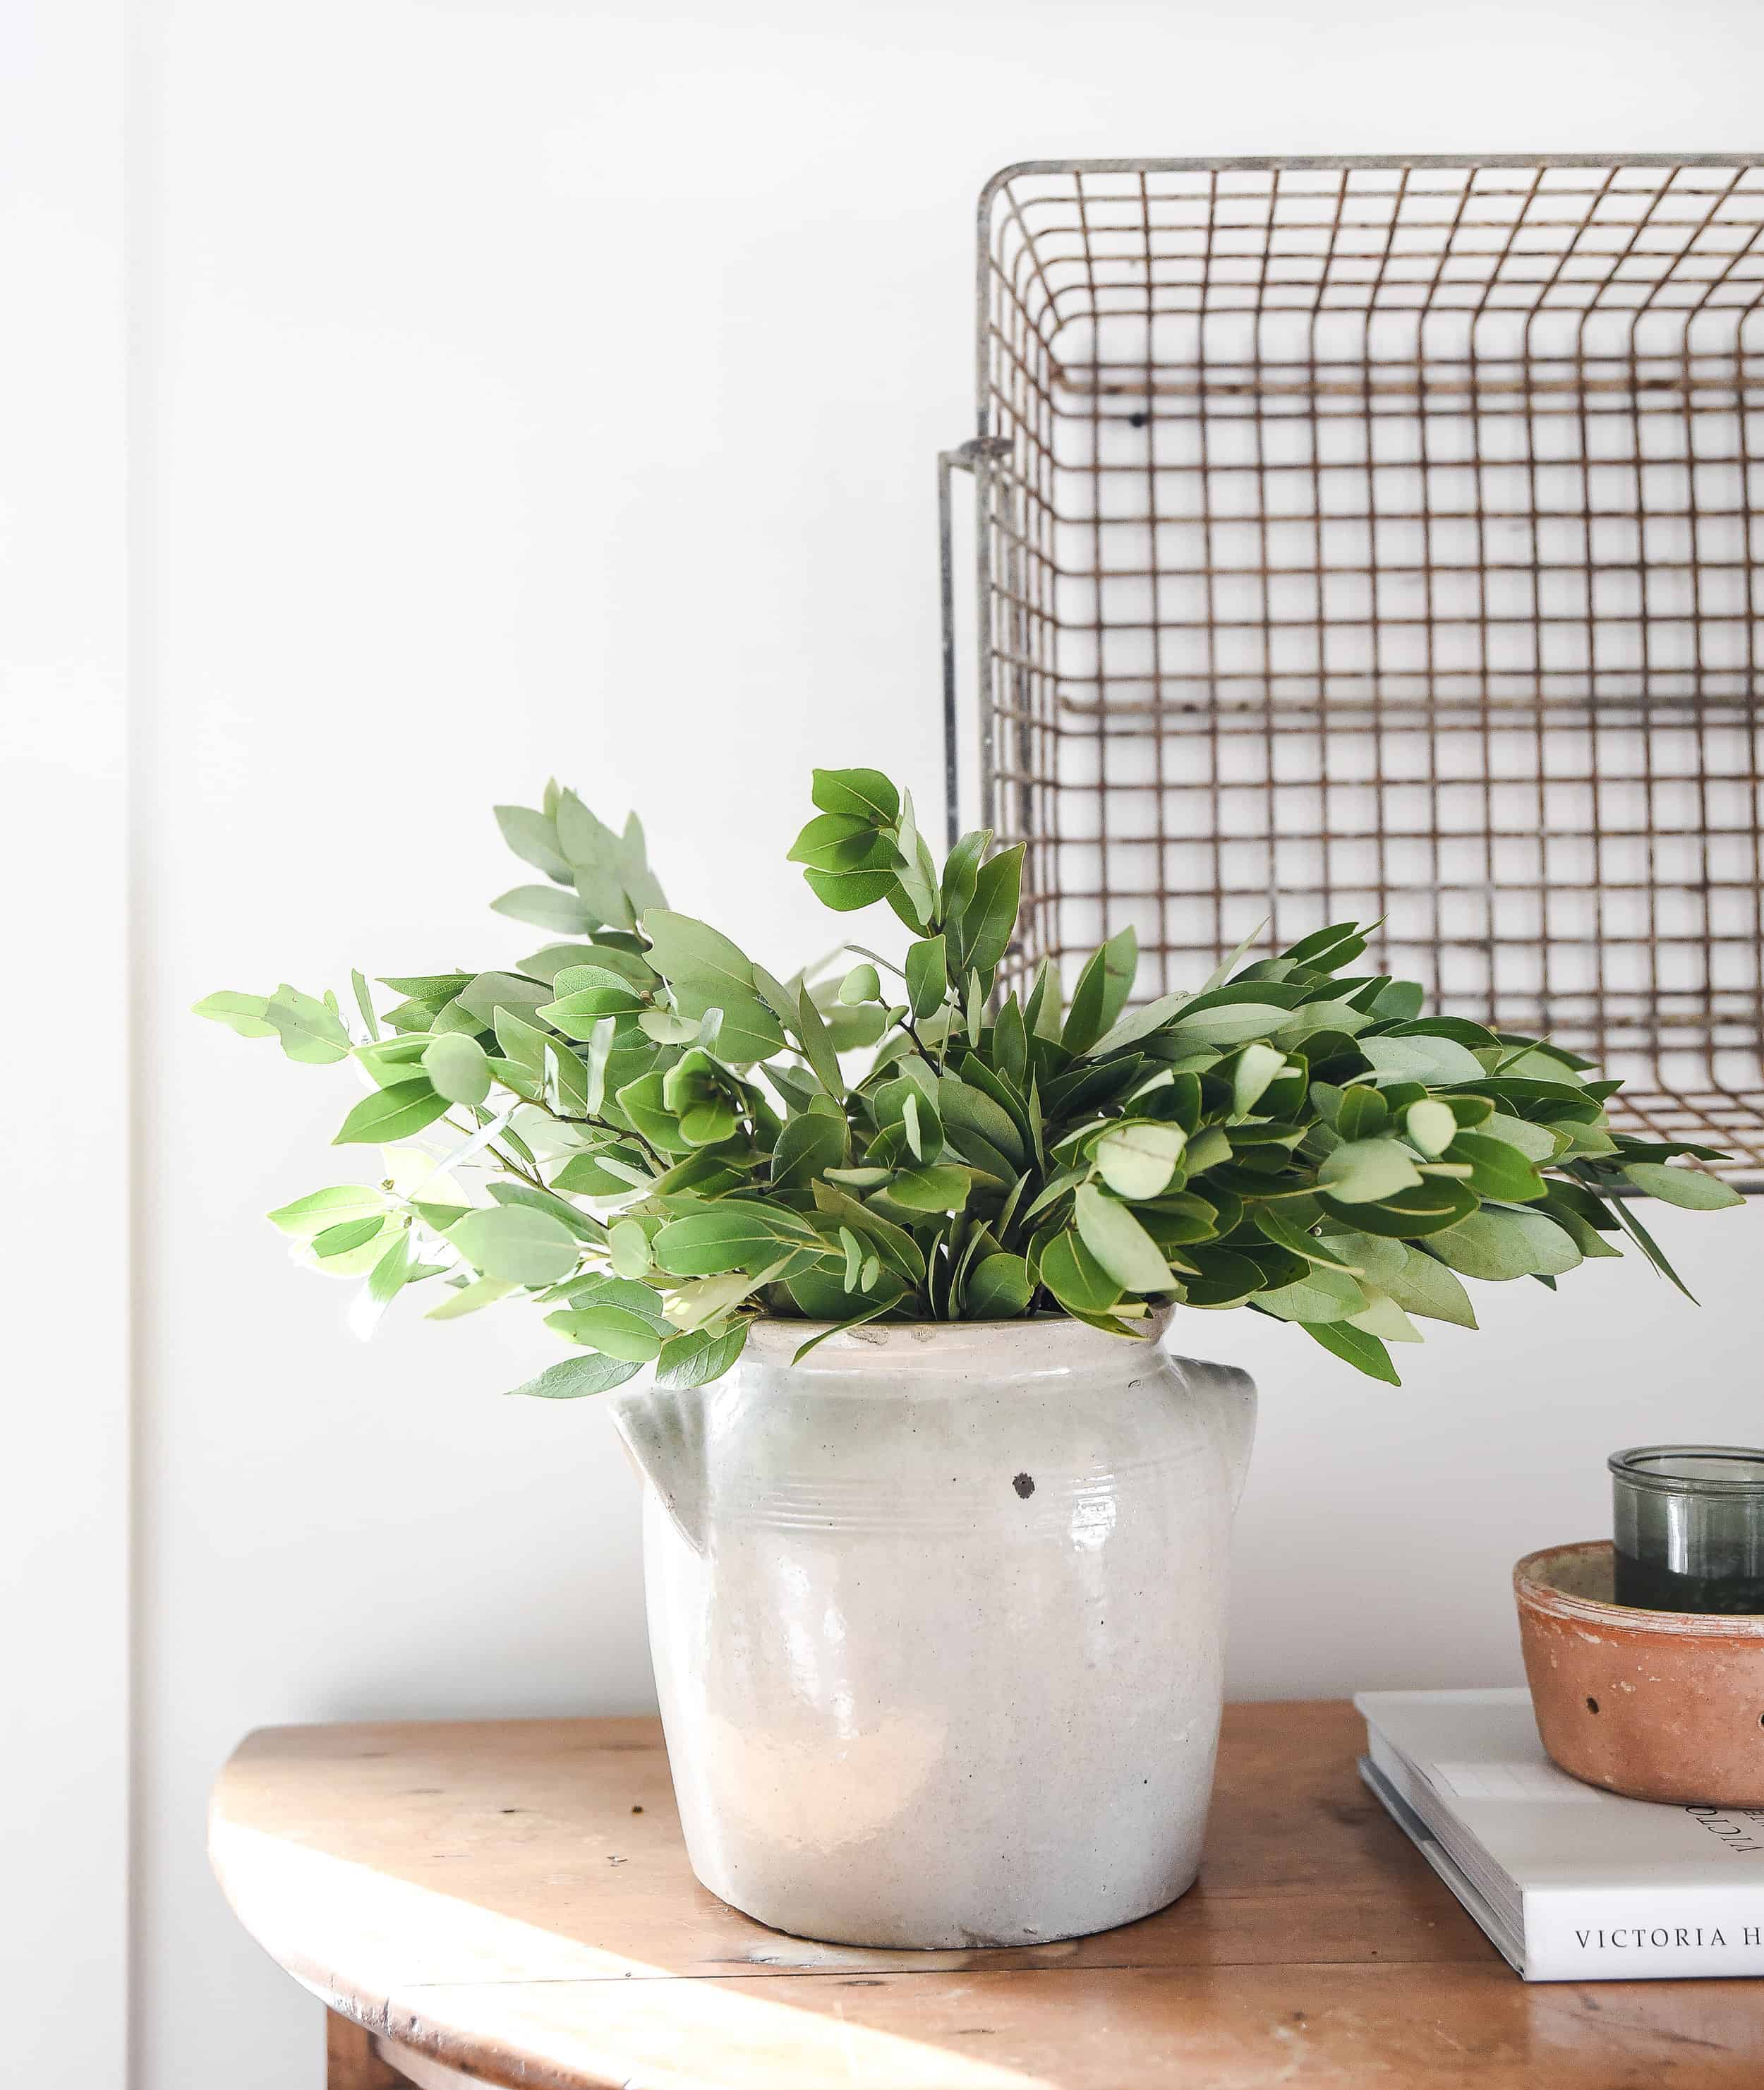 Although spring hasn’t quite arrived, I have already started to change things around hoping to usher in the new season! Take a peek into our spring home and get inspired with decor ideas for your own home!